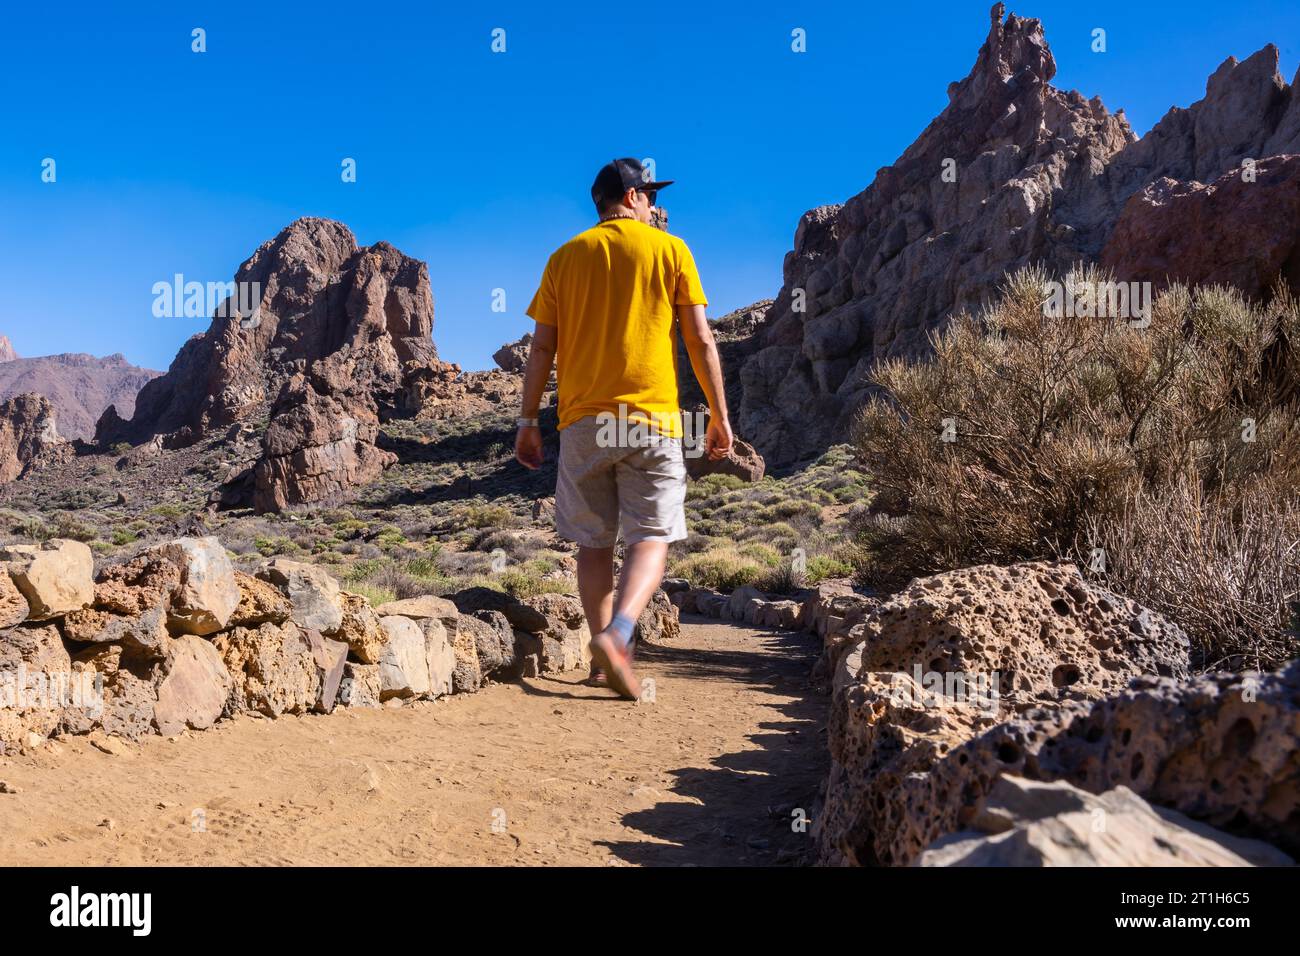 A tourist walking next to the Roques de Gracia and the Roque Cinchado in the natural area of Teide in Tenerife, Canary Islands Stock Photo